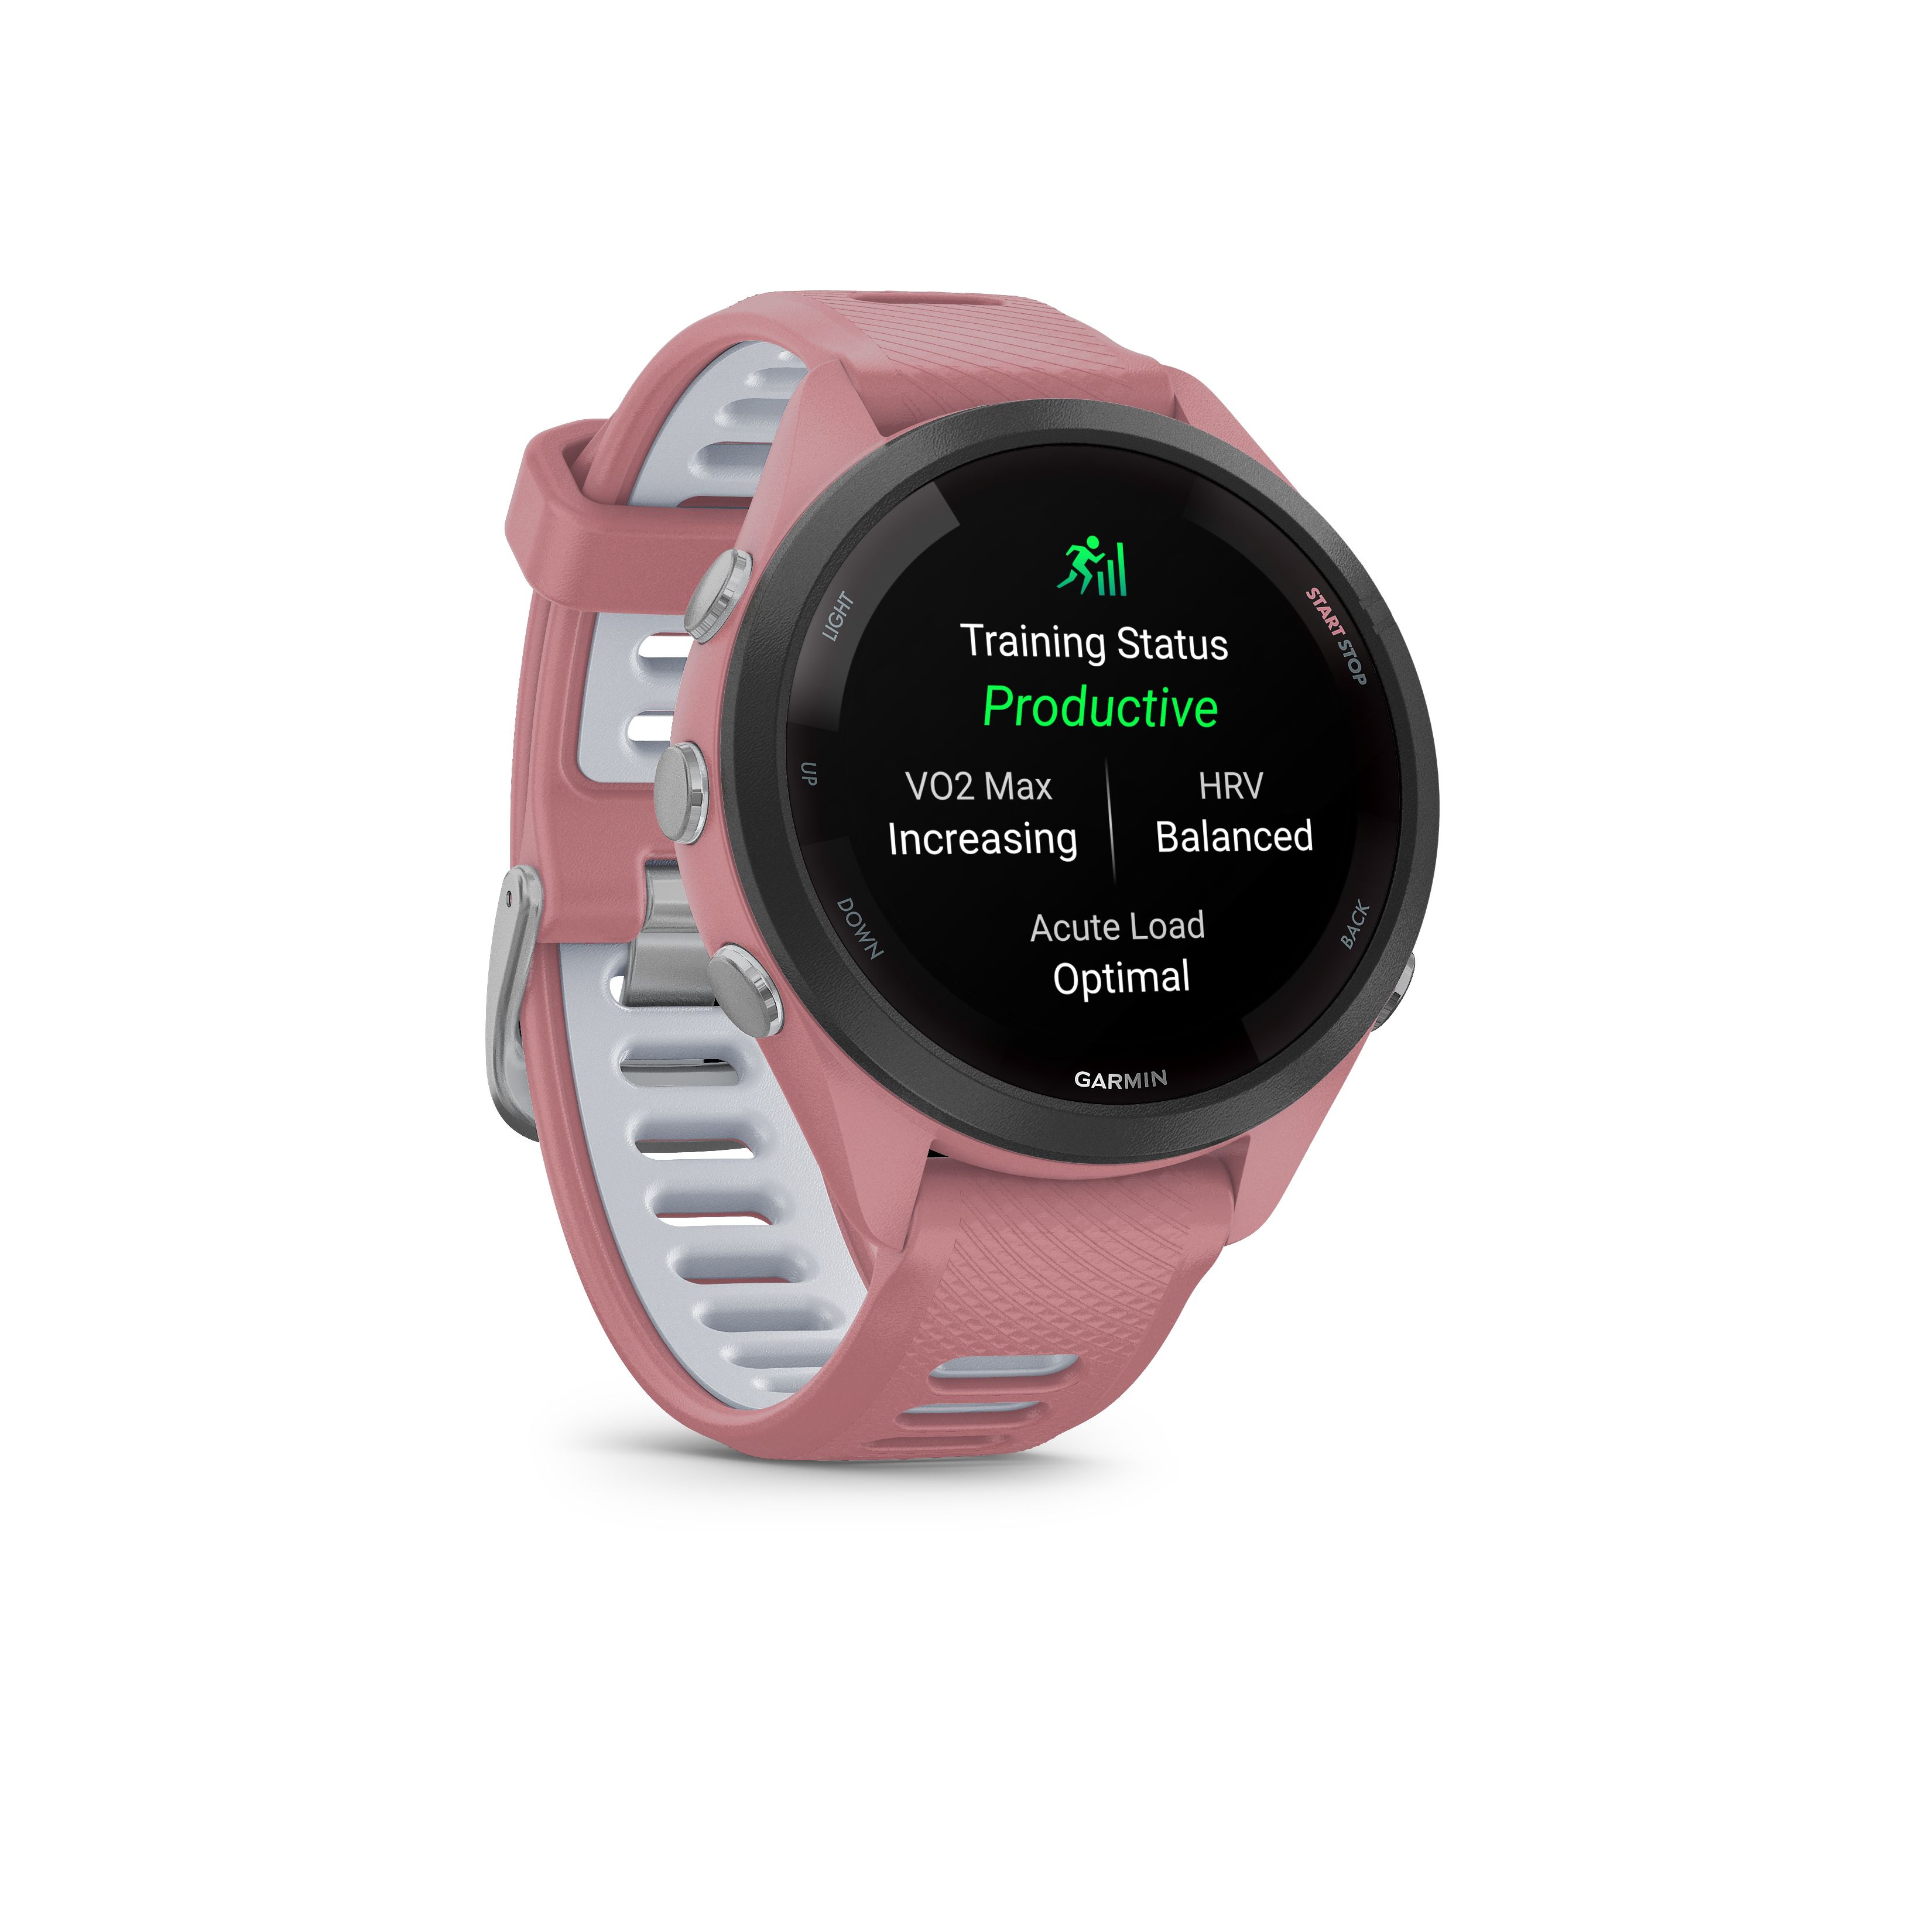 Surprise leak suggests Garmin Forerunner 265 is already in the works